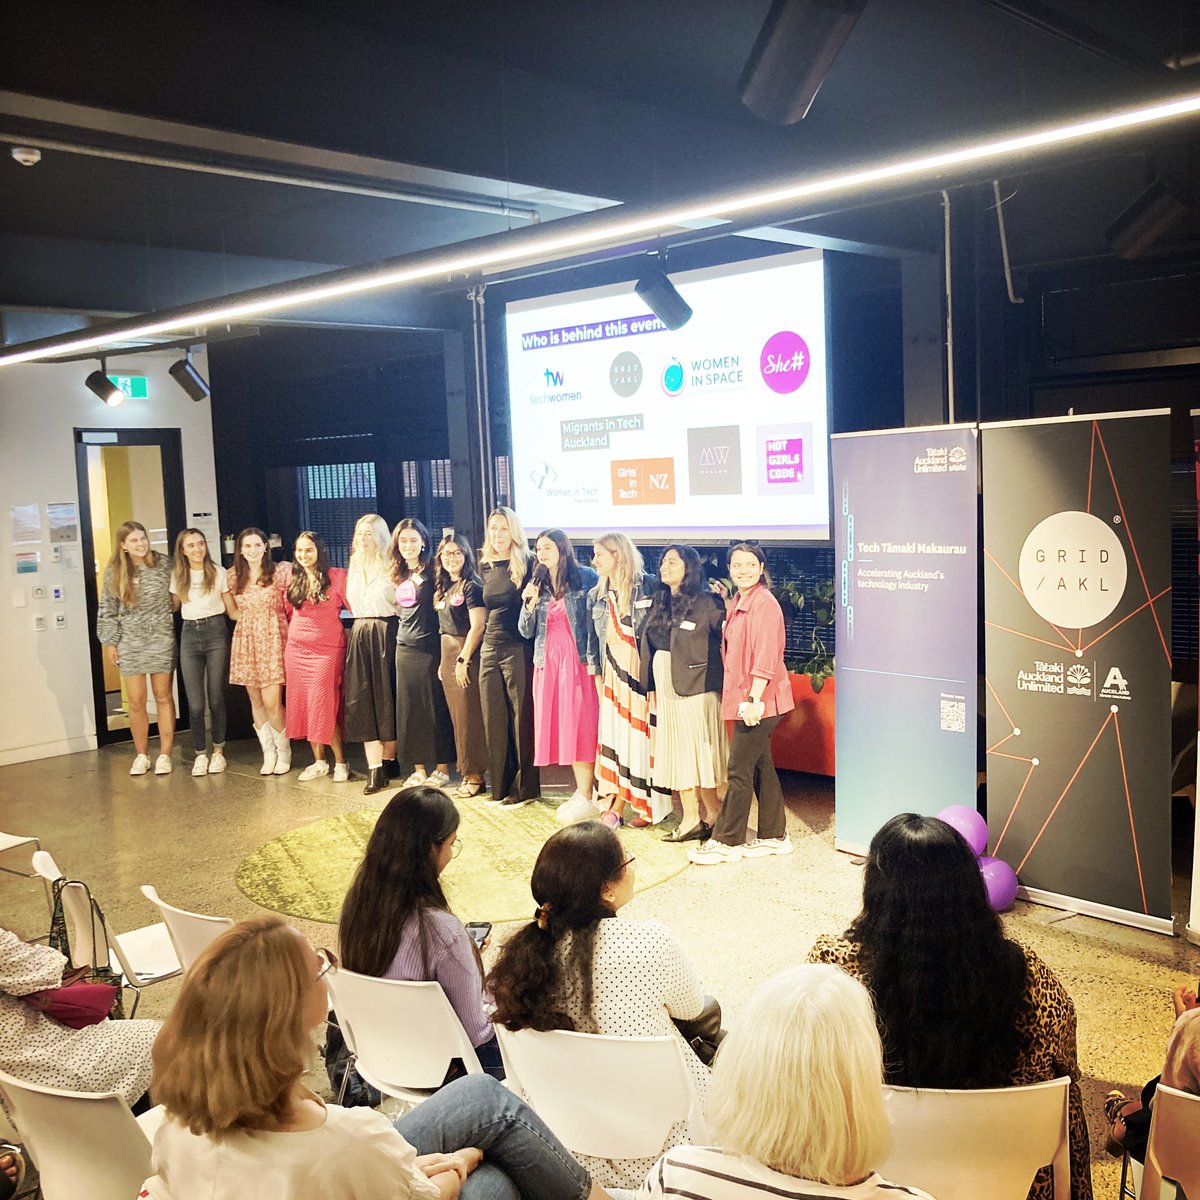 What an evening dedicated to ‘Women in Tech in Tāmaki Makaurau Auckland’ at @GridAKL. Happy to be here & listen to the stories of inspiring female speakers. Have a great IWD!

#IWD #iwd2024 #womenPower #ourAkl #community #womenintech #gridAkl @MUVTalks @AklCouncil @WeavingHouse